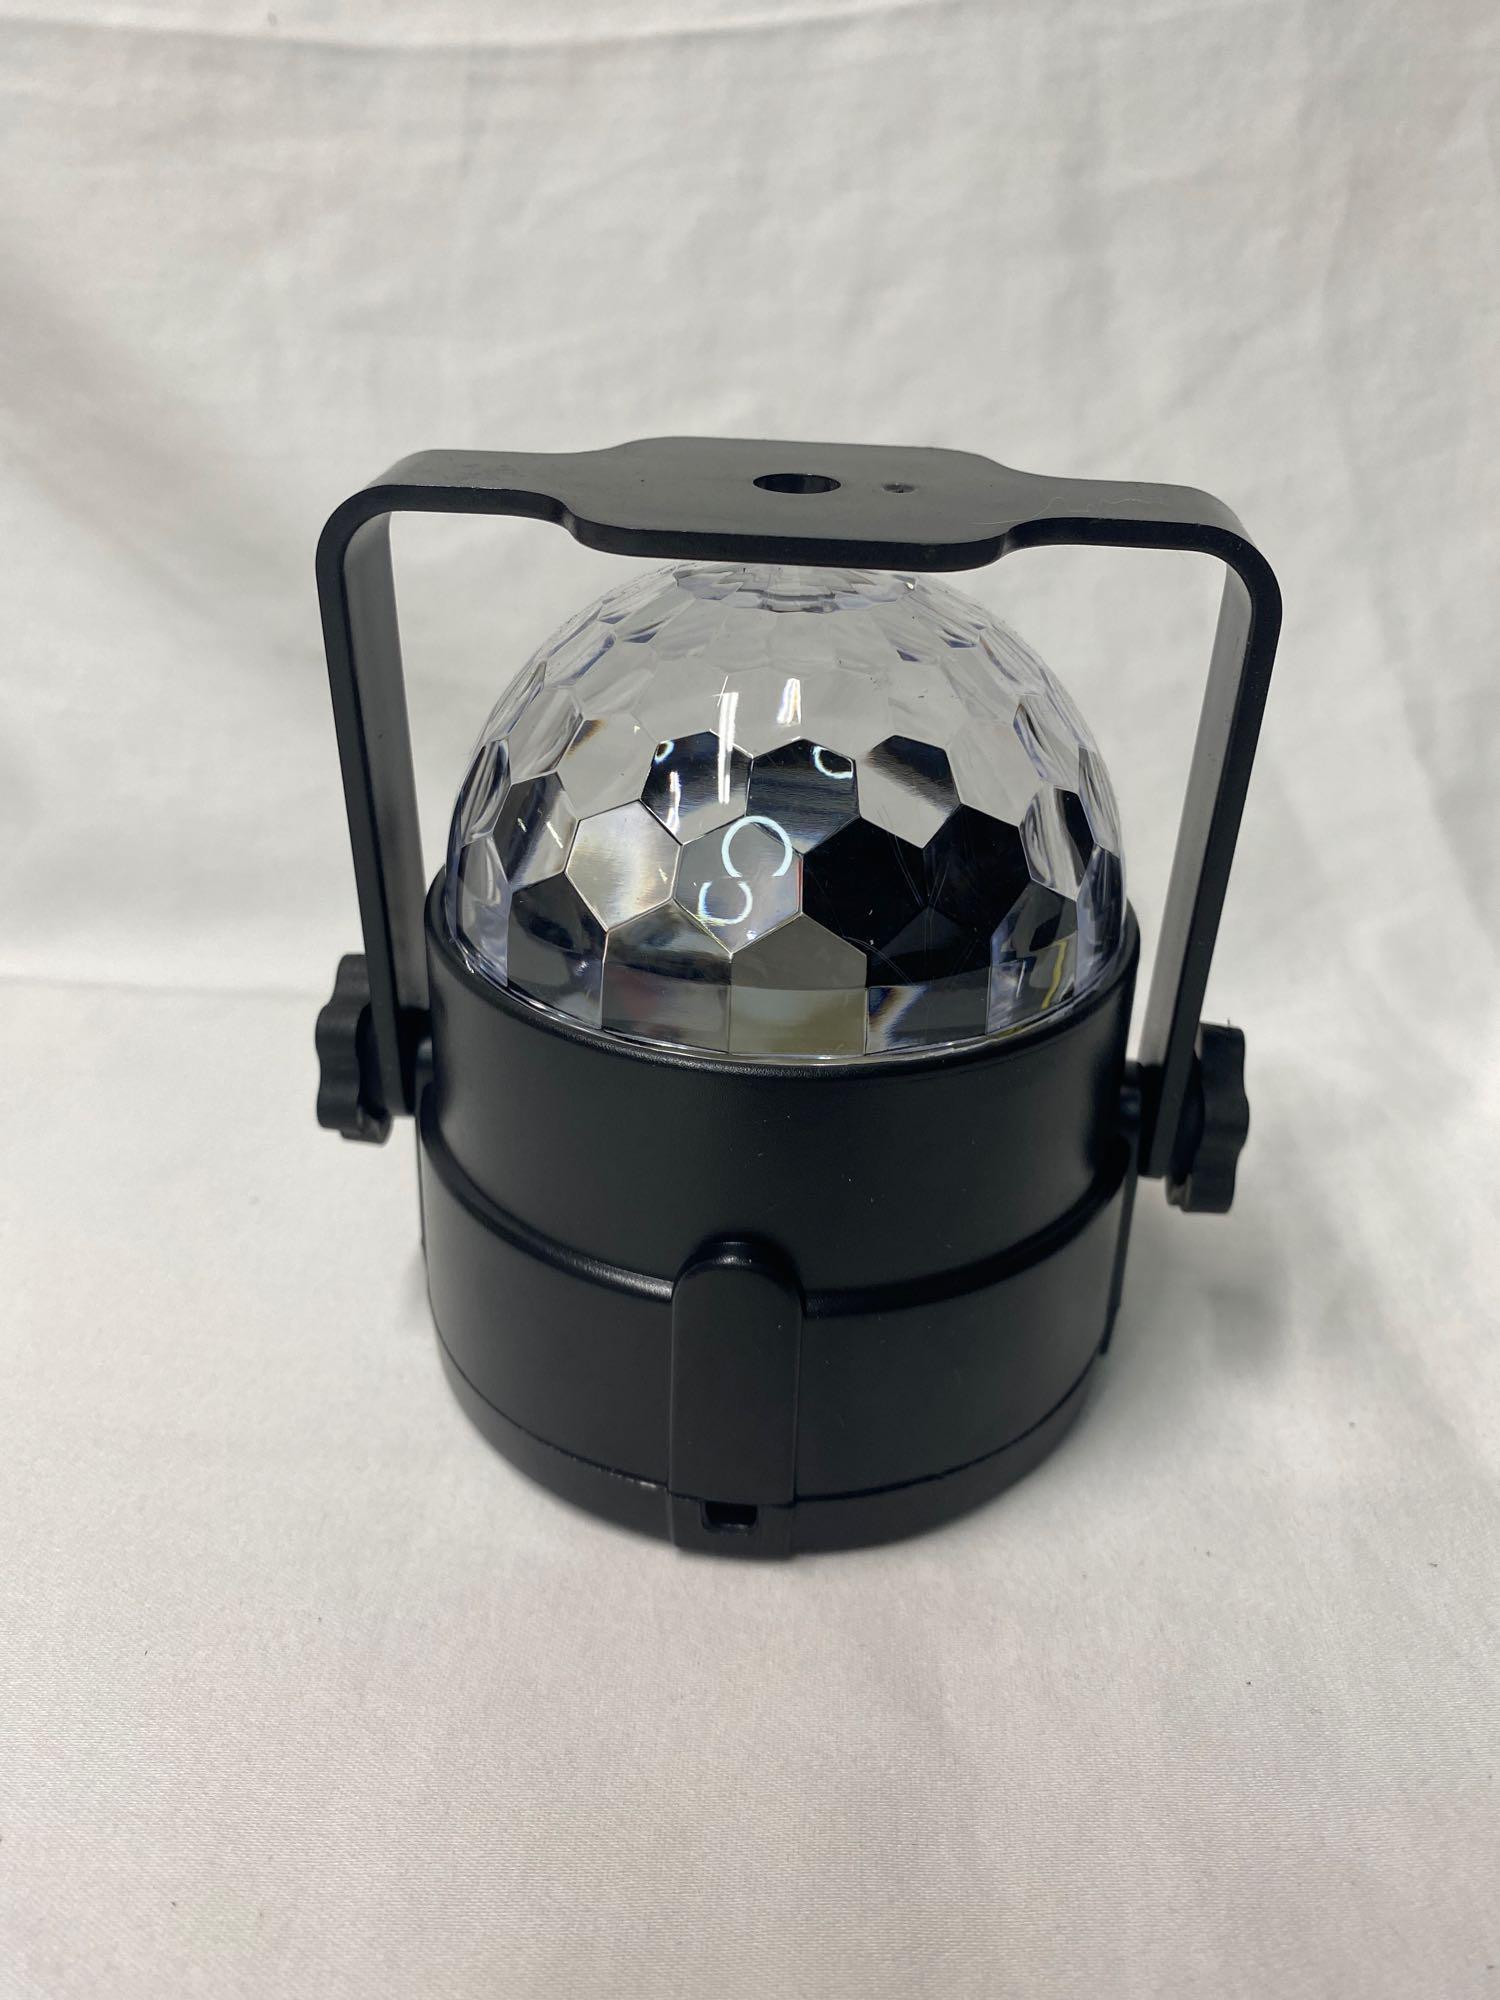 7 Colors Sound Activated Remote Control Rotating Crystal Ball DJ Light, $35.99 MSRP (BRAND NEW)